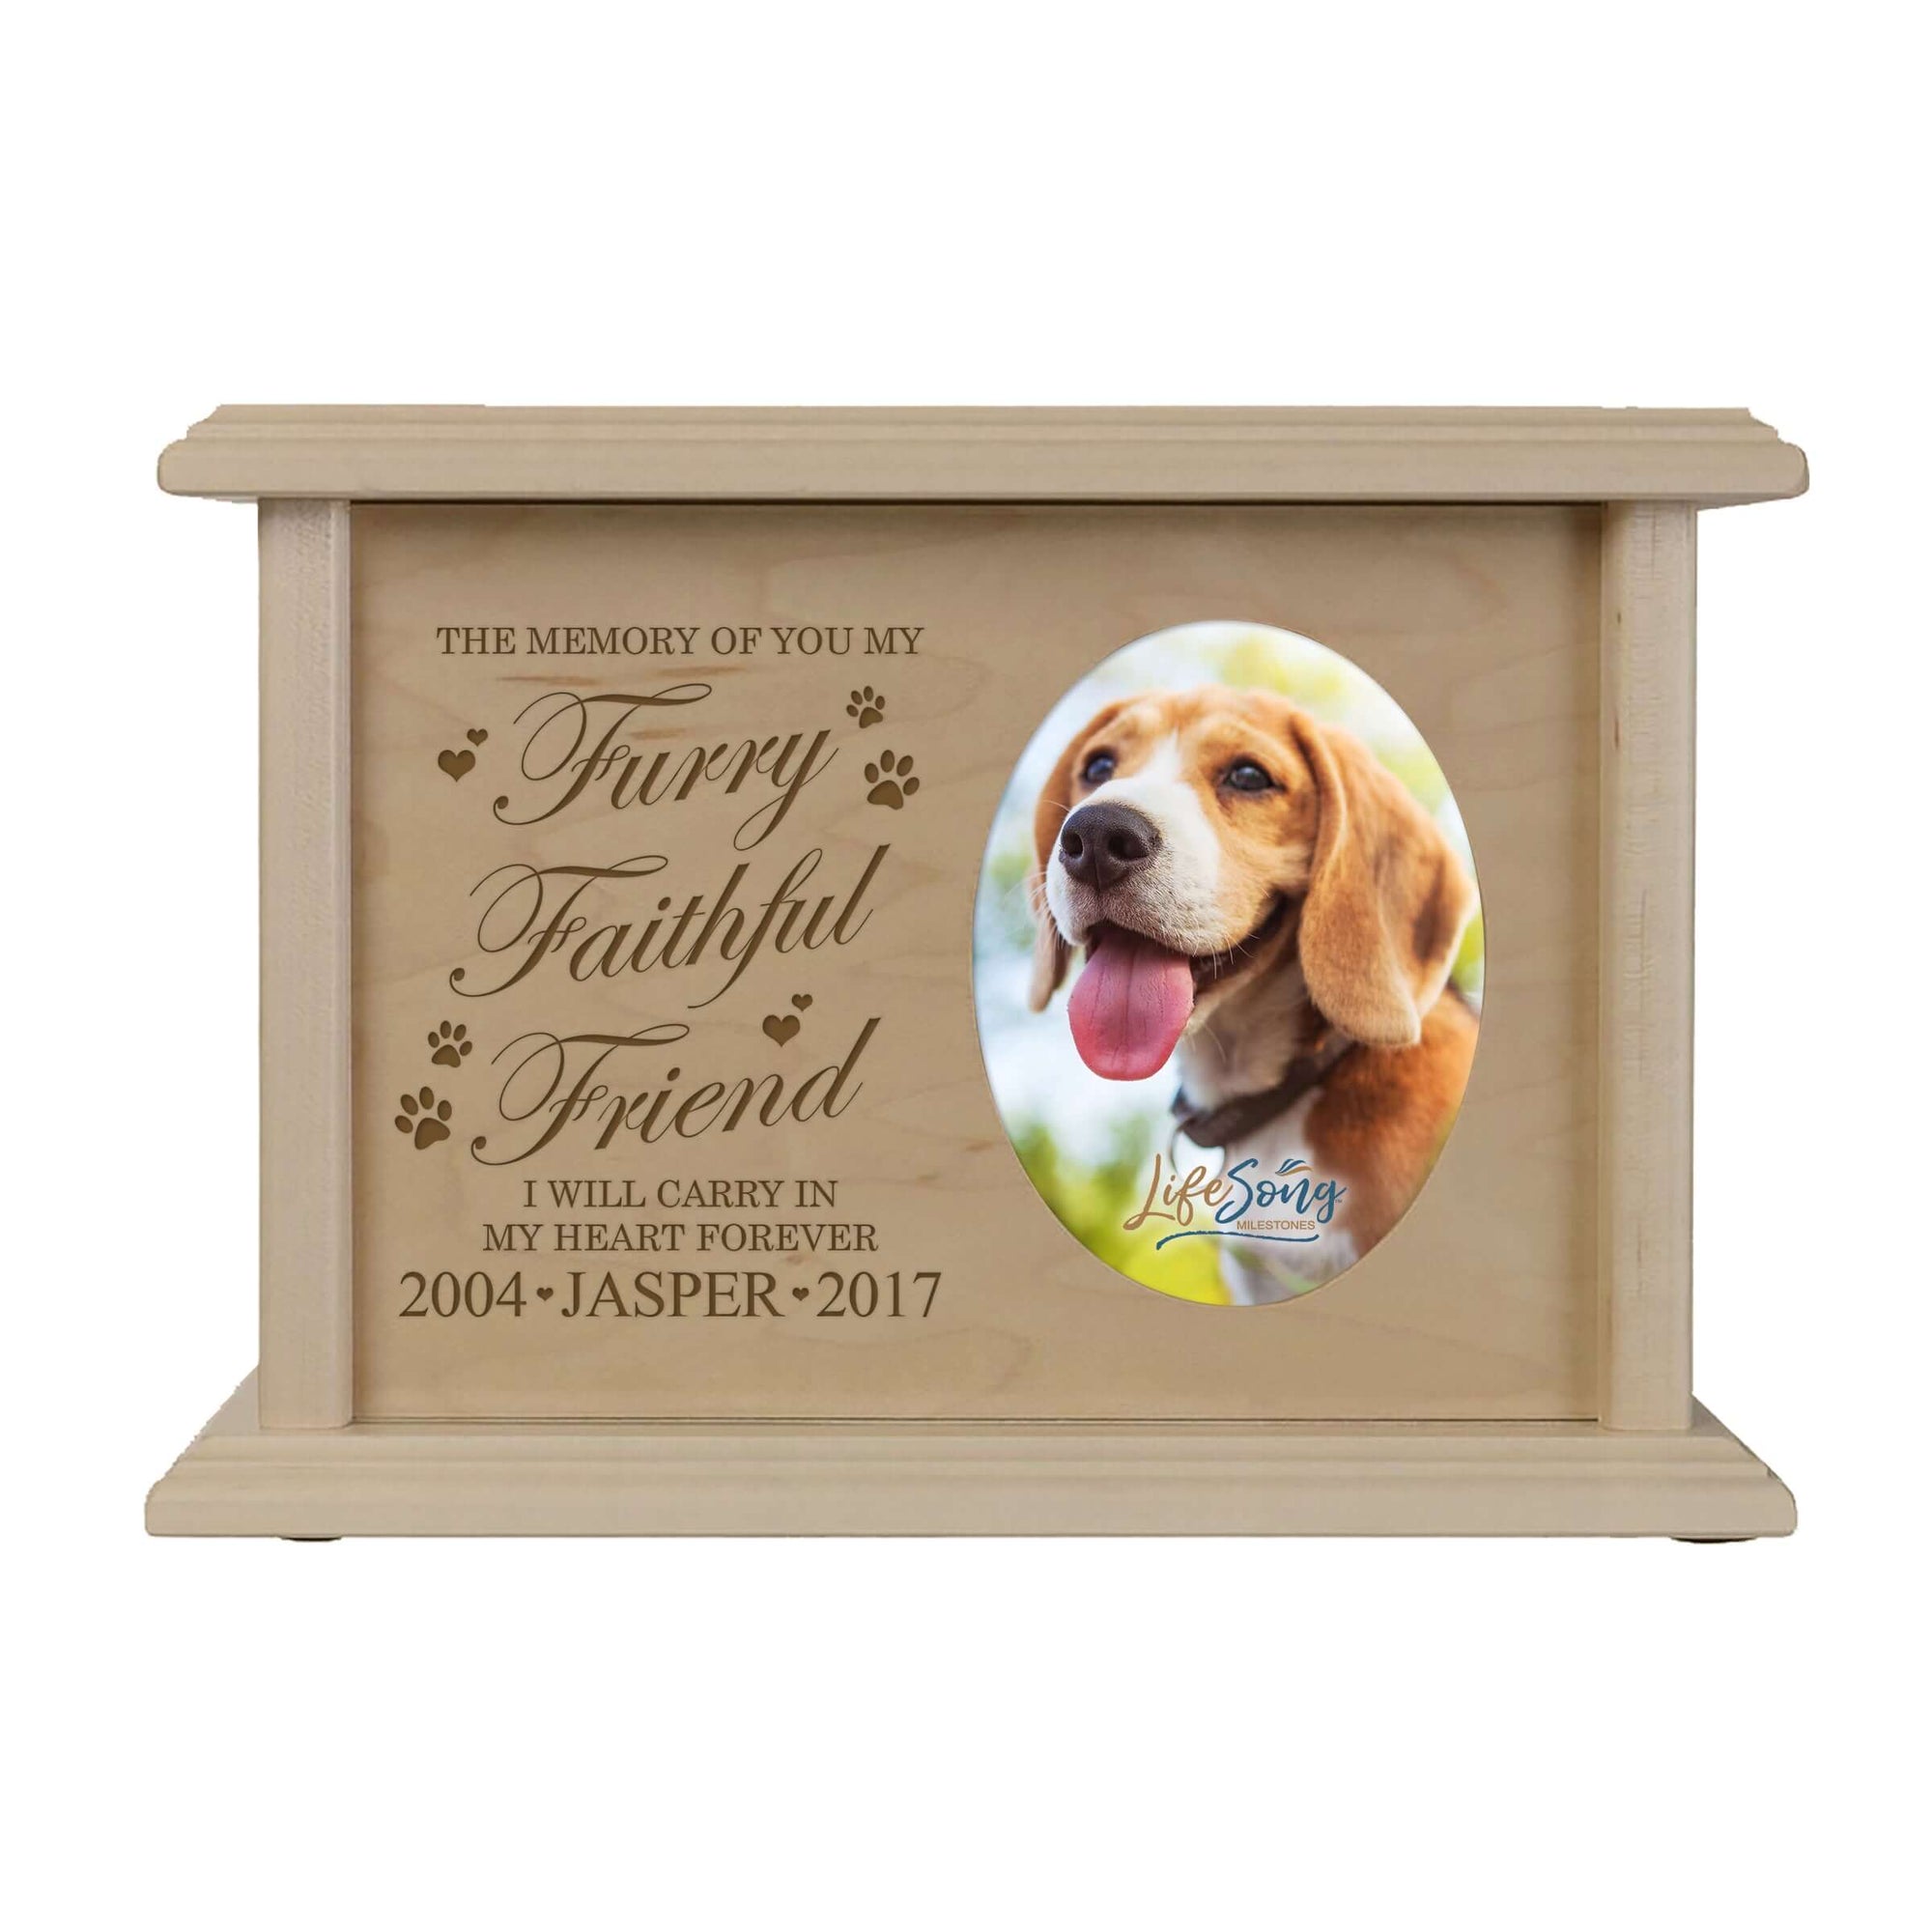 Cherry Pet Memorial 2x3 Picture Urn with phrase "The Memory of You"